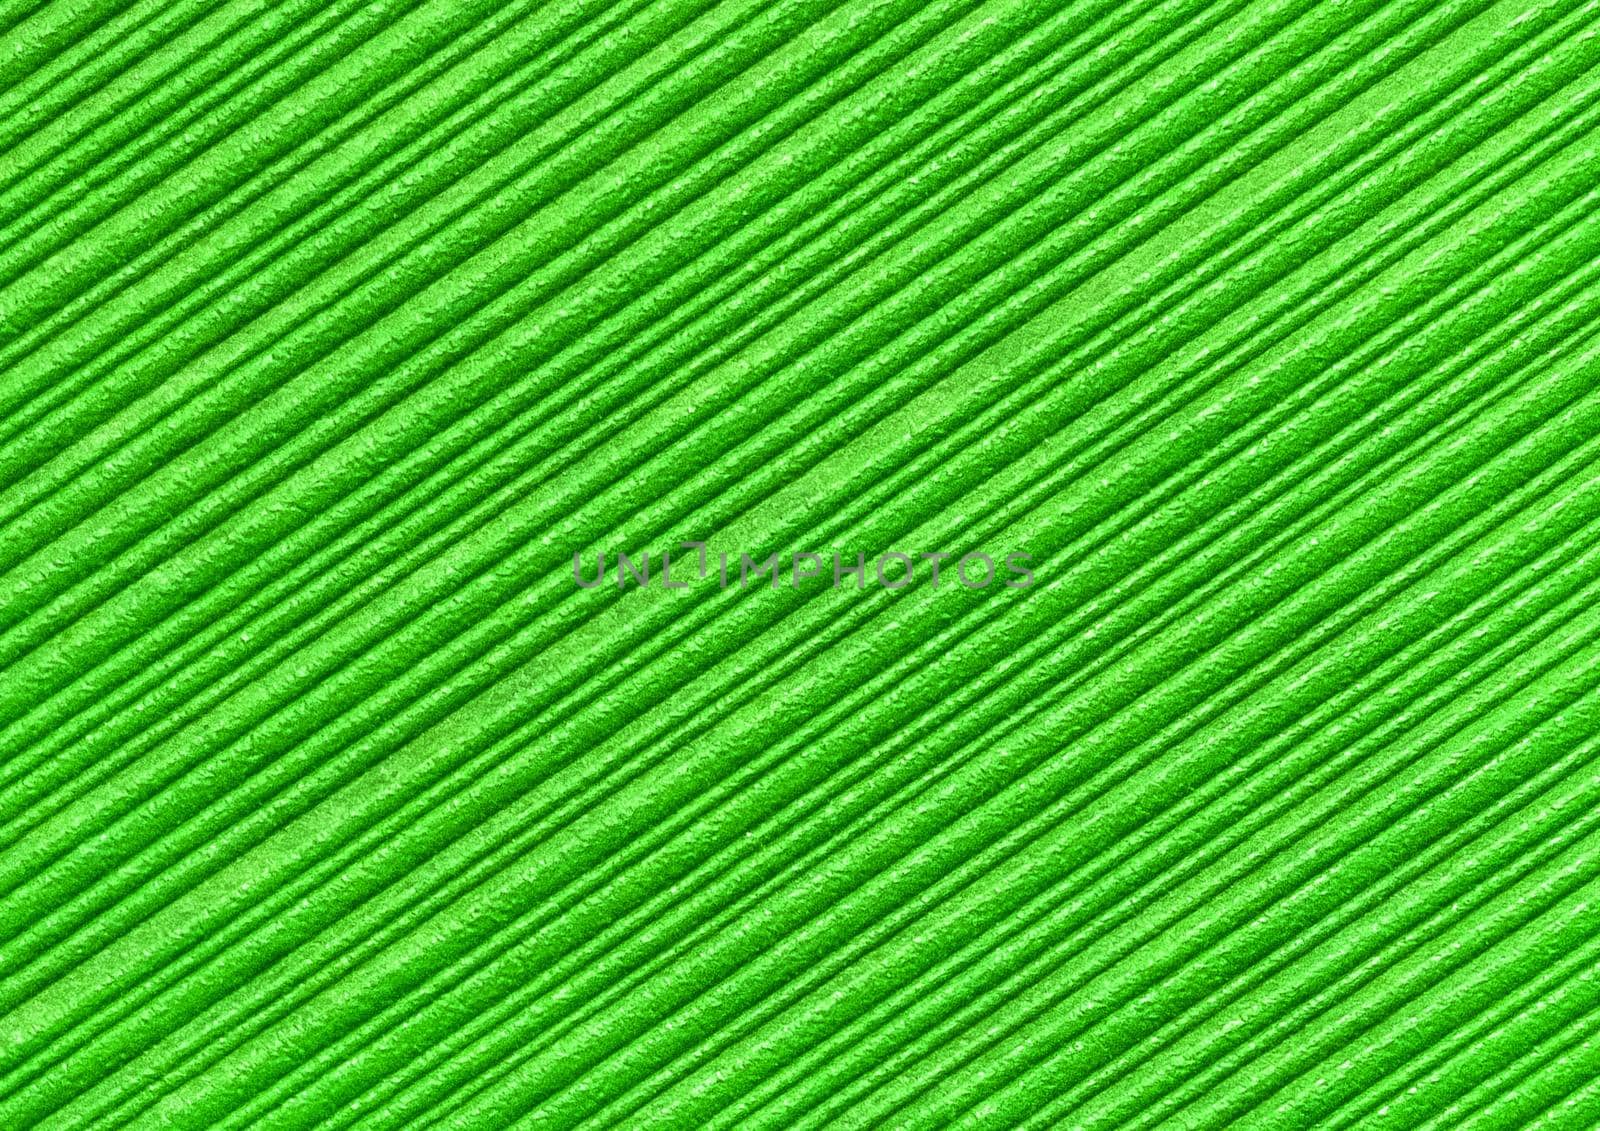 Green abstract striped pattern wallpaper background, paper texture with diagonal lines.